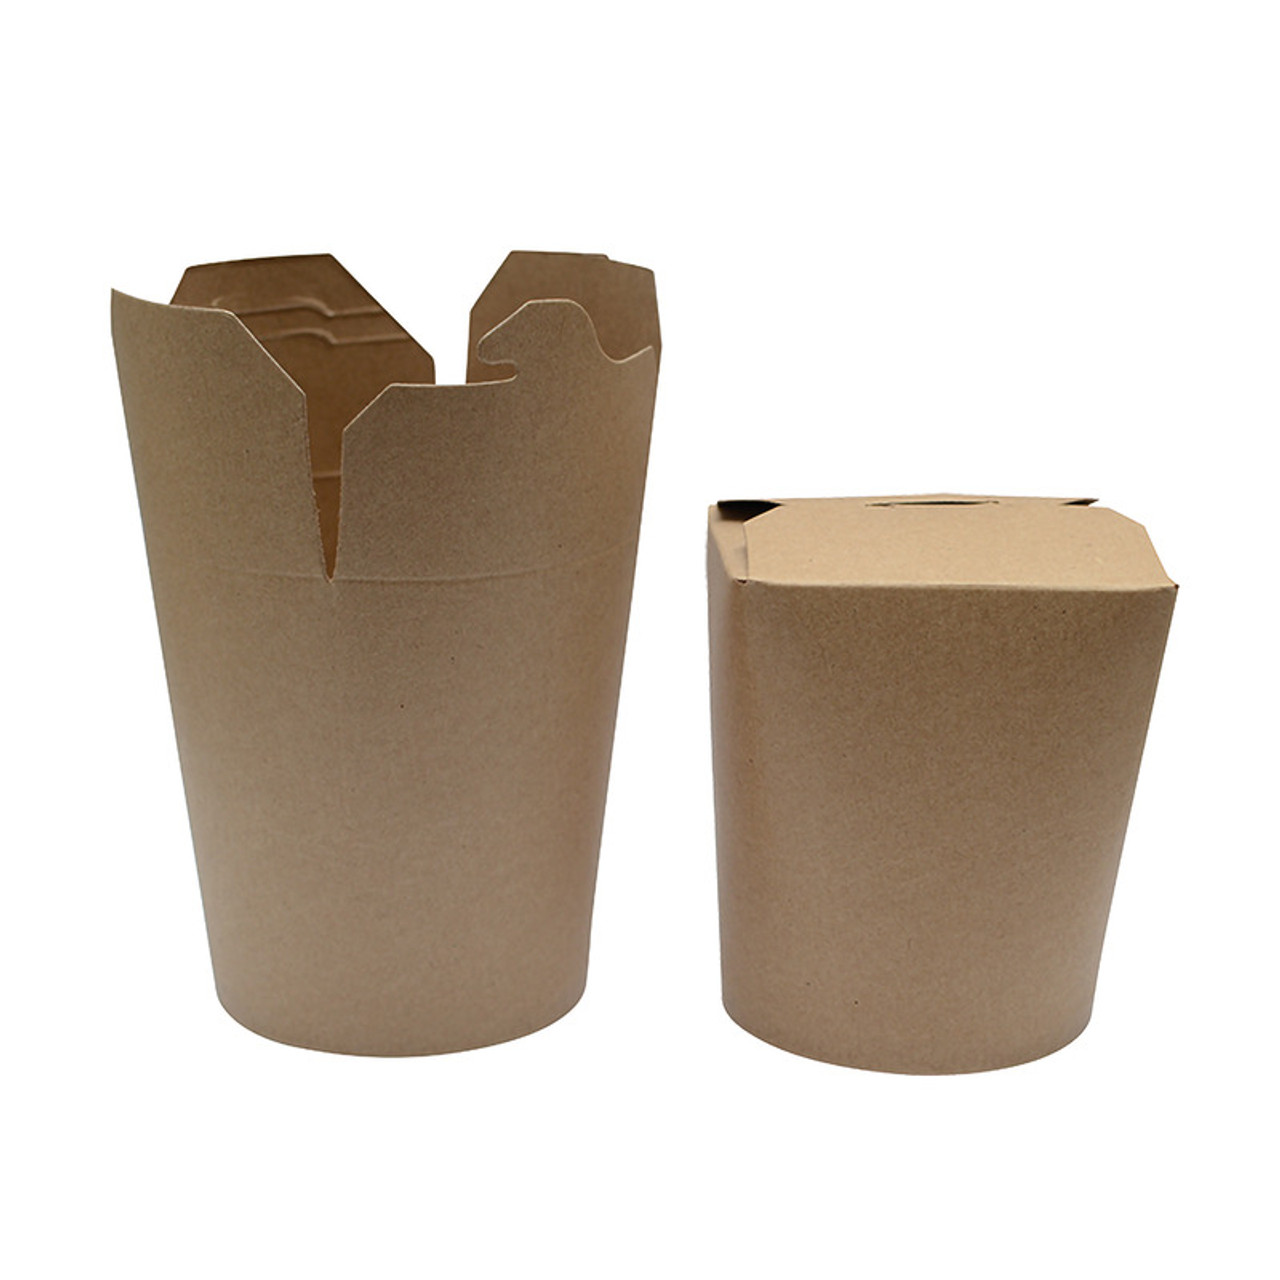 Order a Sample - Kraft Take Out Container L:4.65 x W:3.65 x H:4in